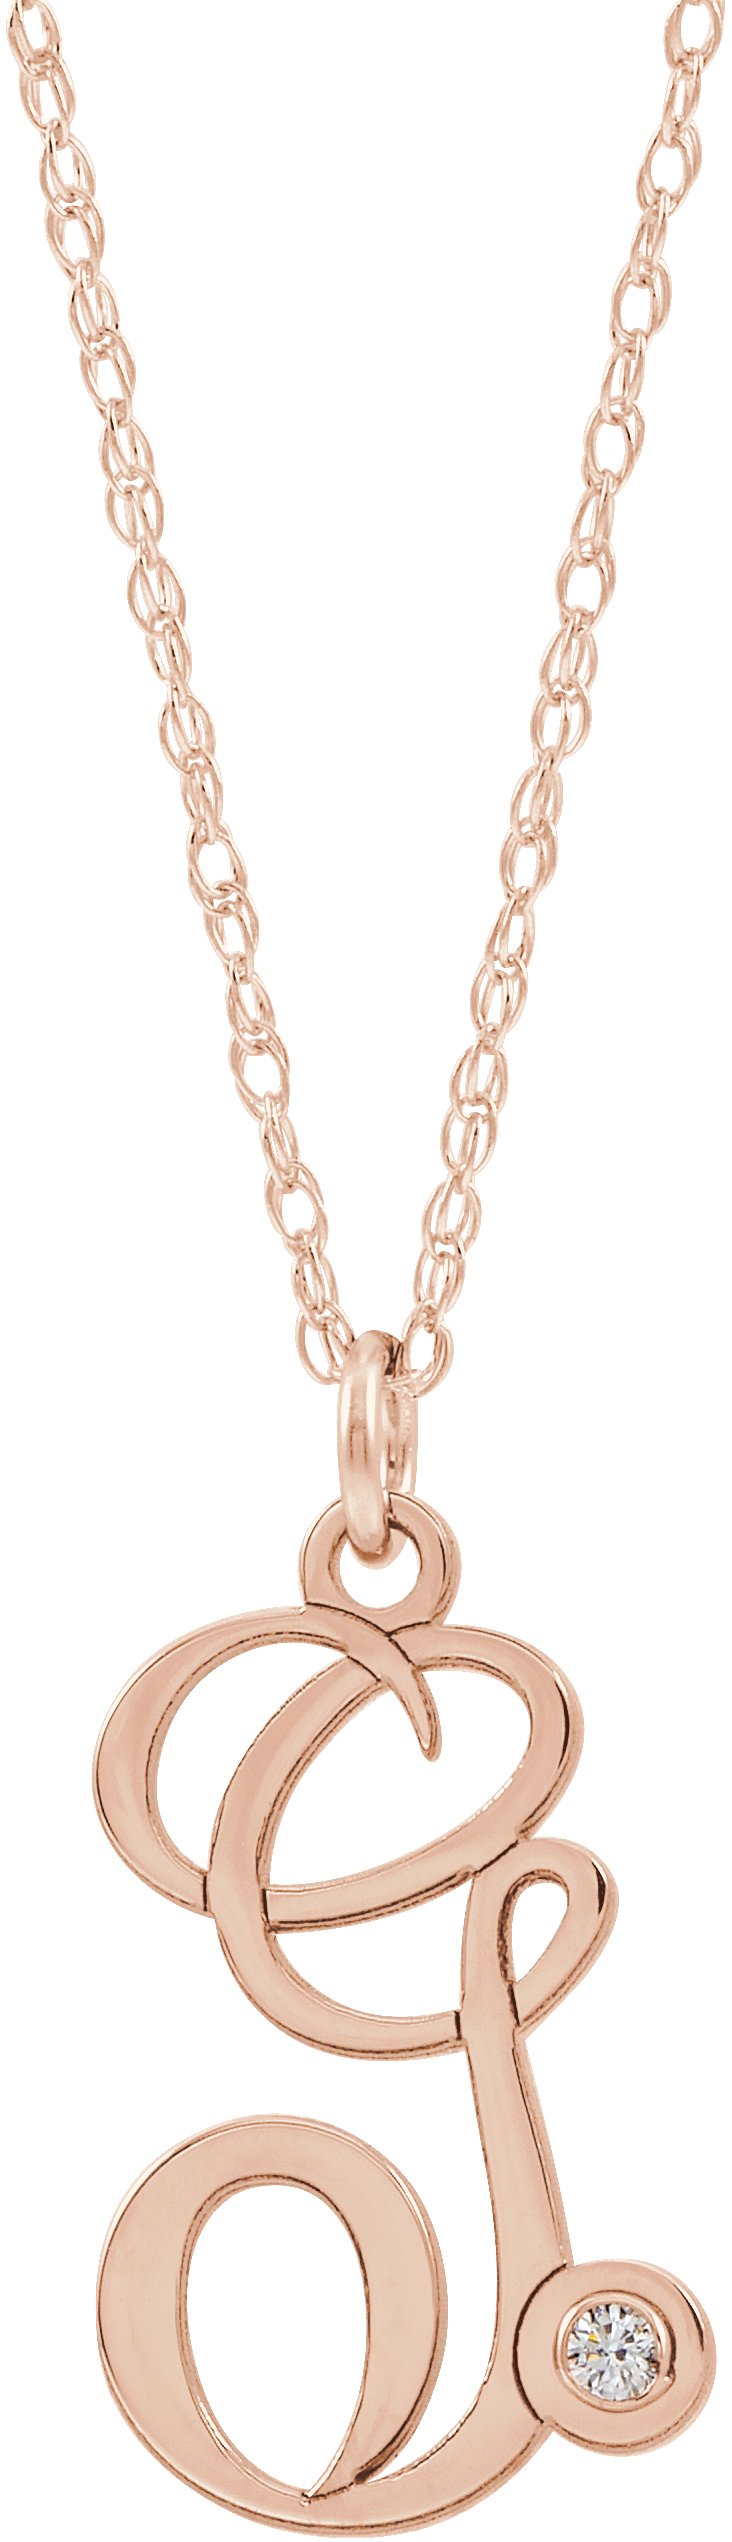 14K Rose Gold-Plated Sterling Silver .02 CT Diamond Script Initial G 16-18" Necklace